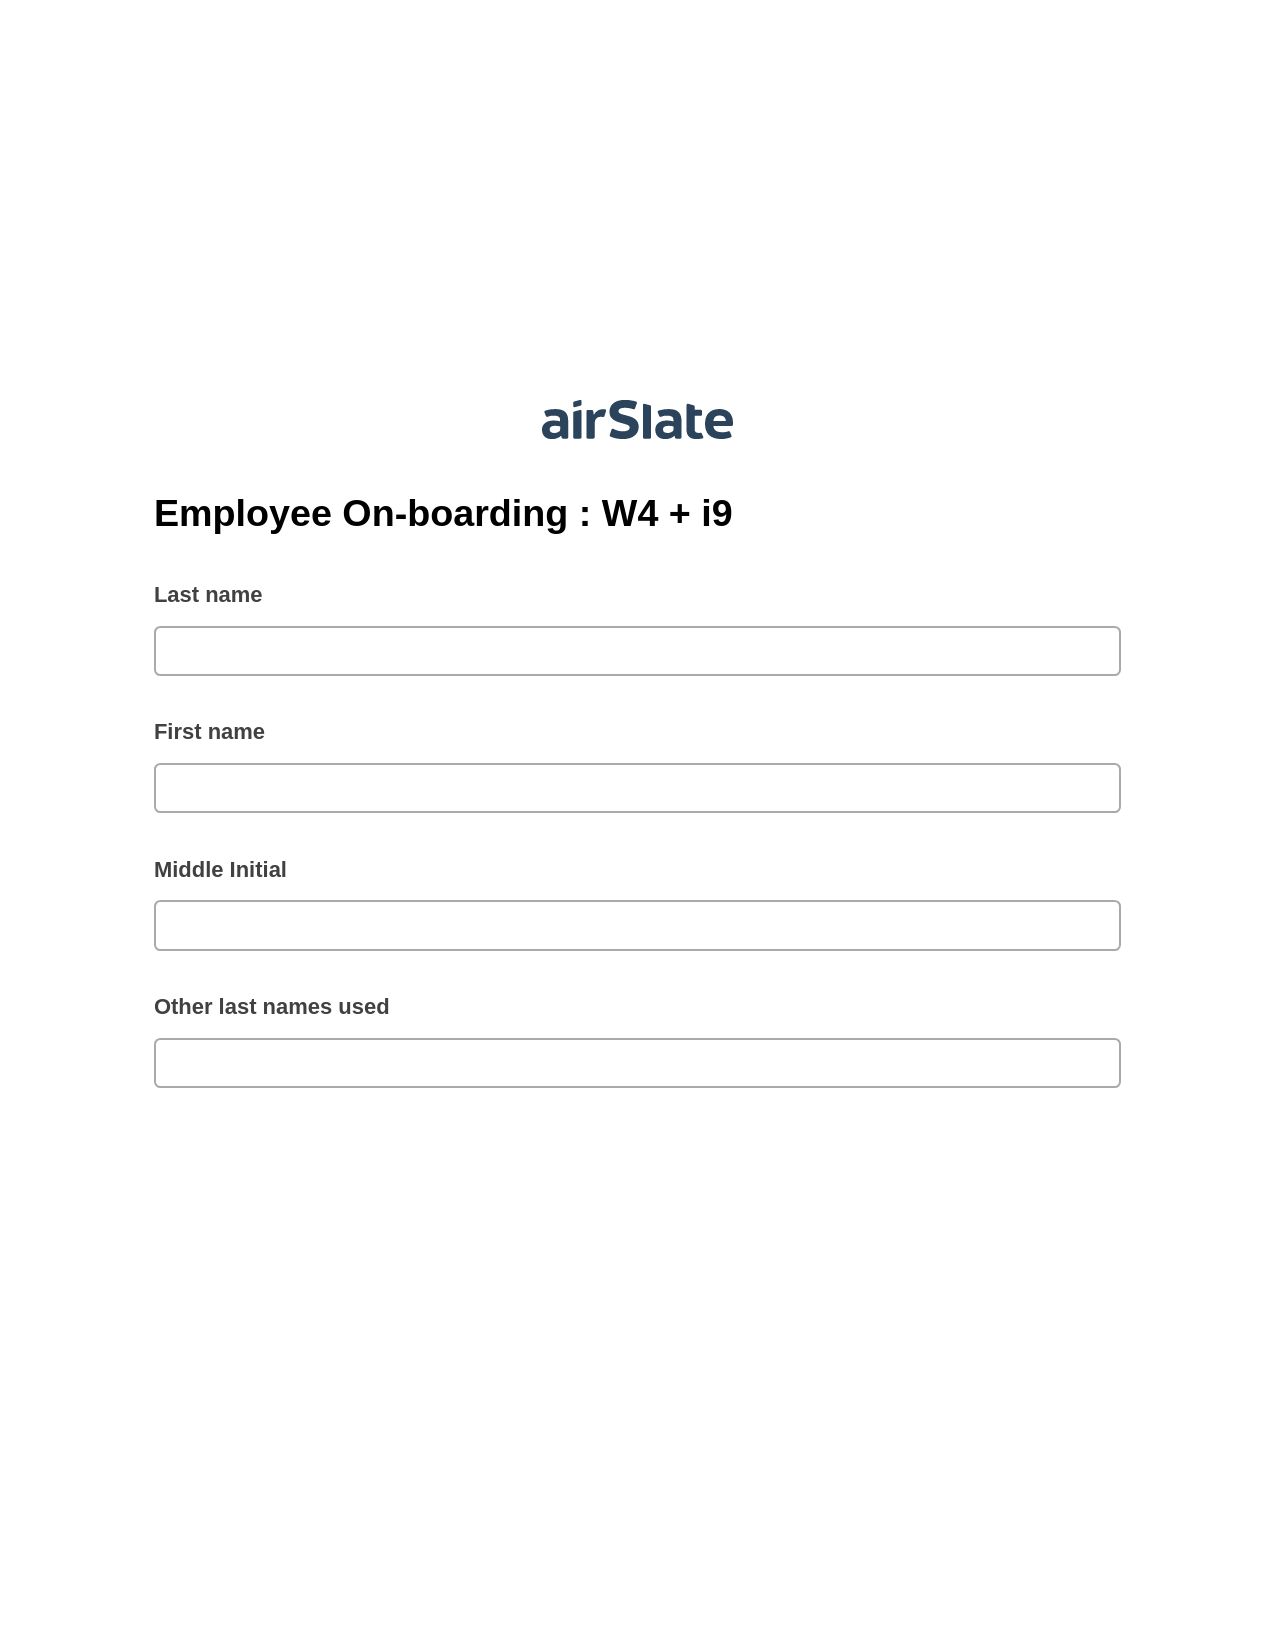 Employee On-boarding : W4 + i9 Pre-fill Dropdowns from CSV File Bot, Pre-fill with Custom Data Bot, Export to Formstack Documents Bot